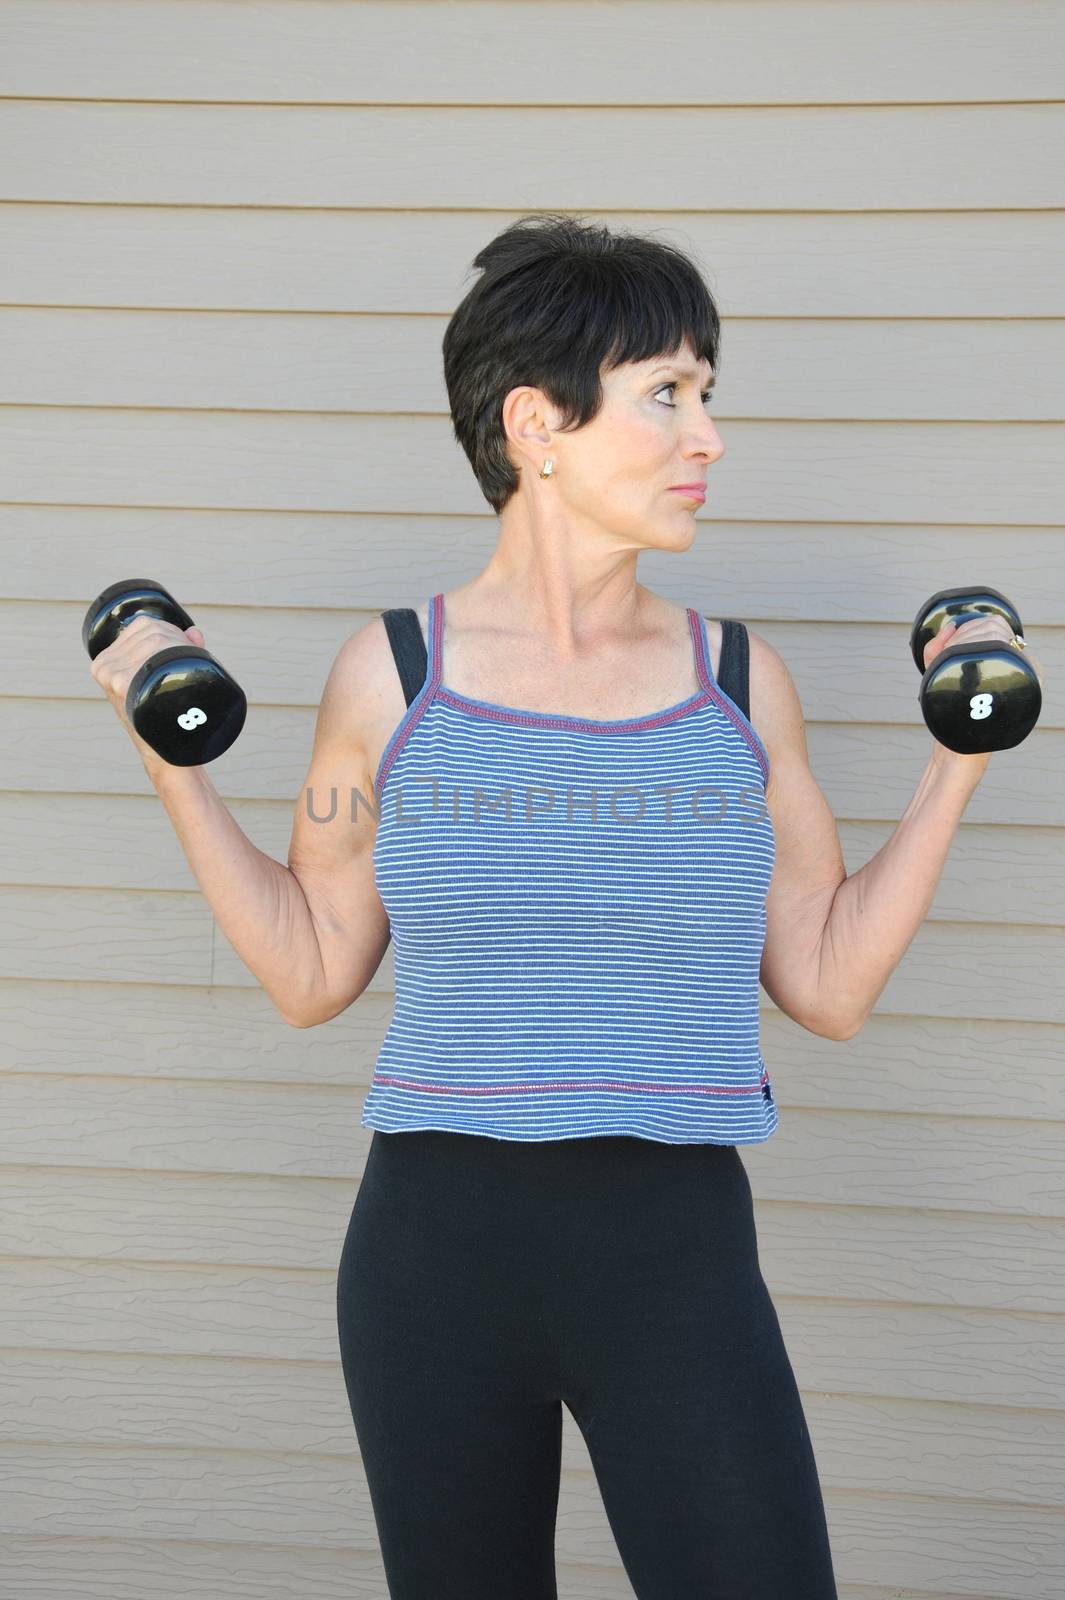 Mature female beauty working out with hand weights outside.